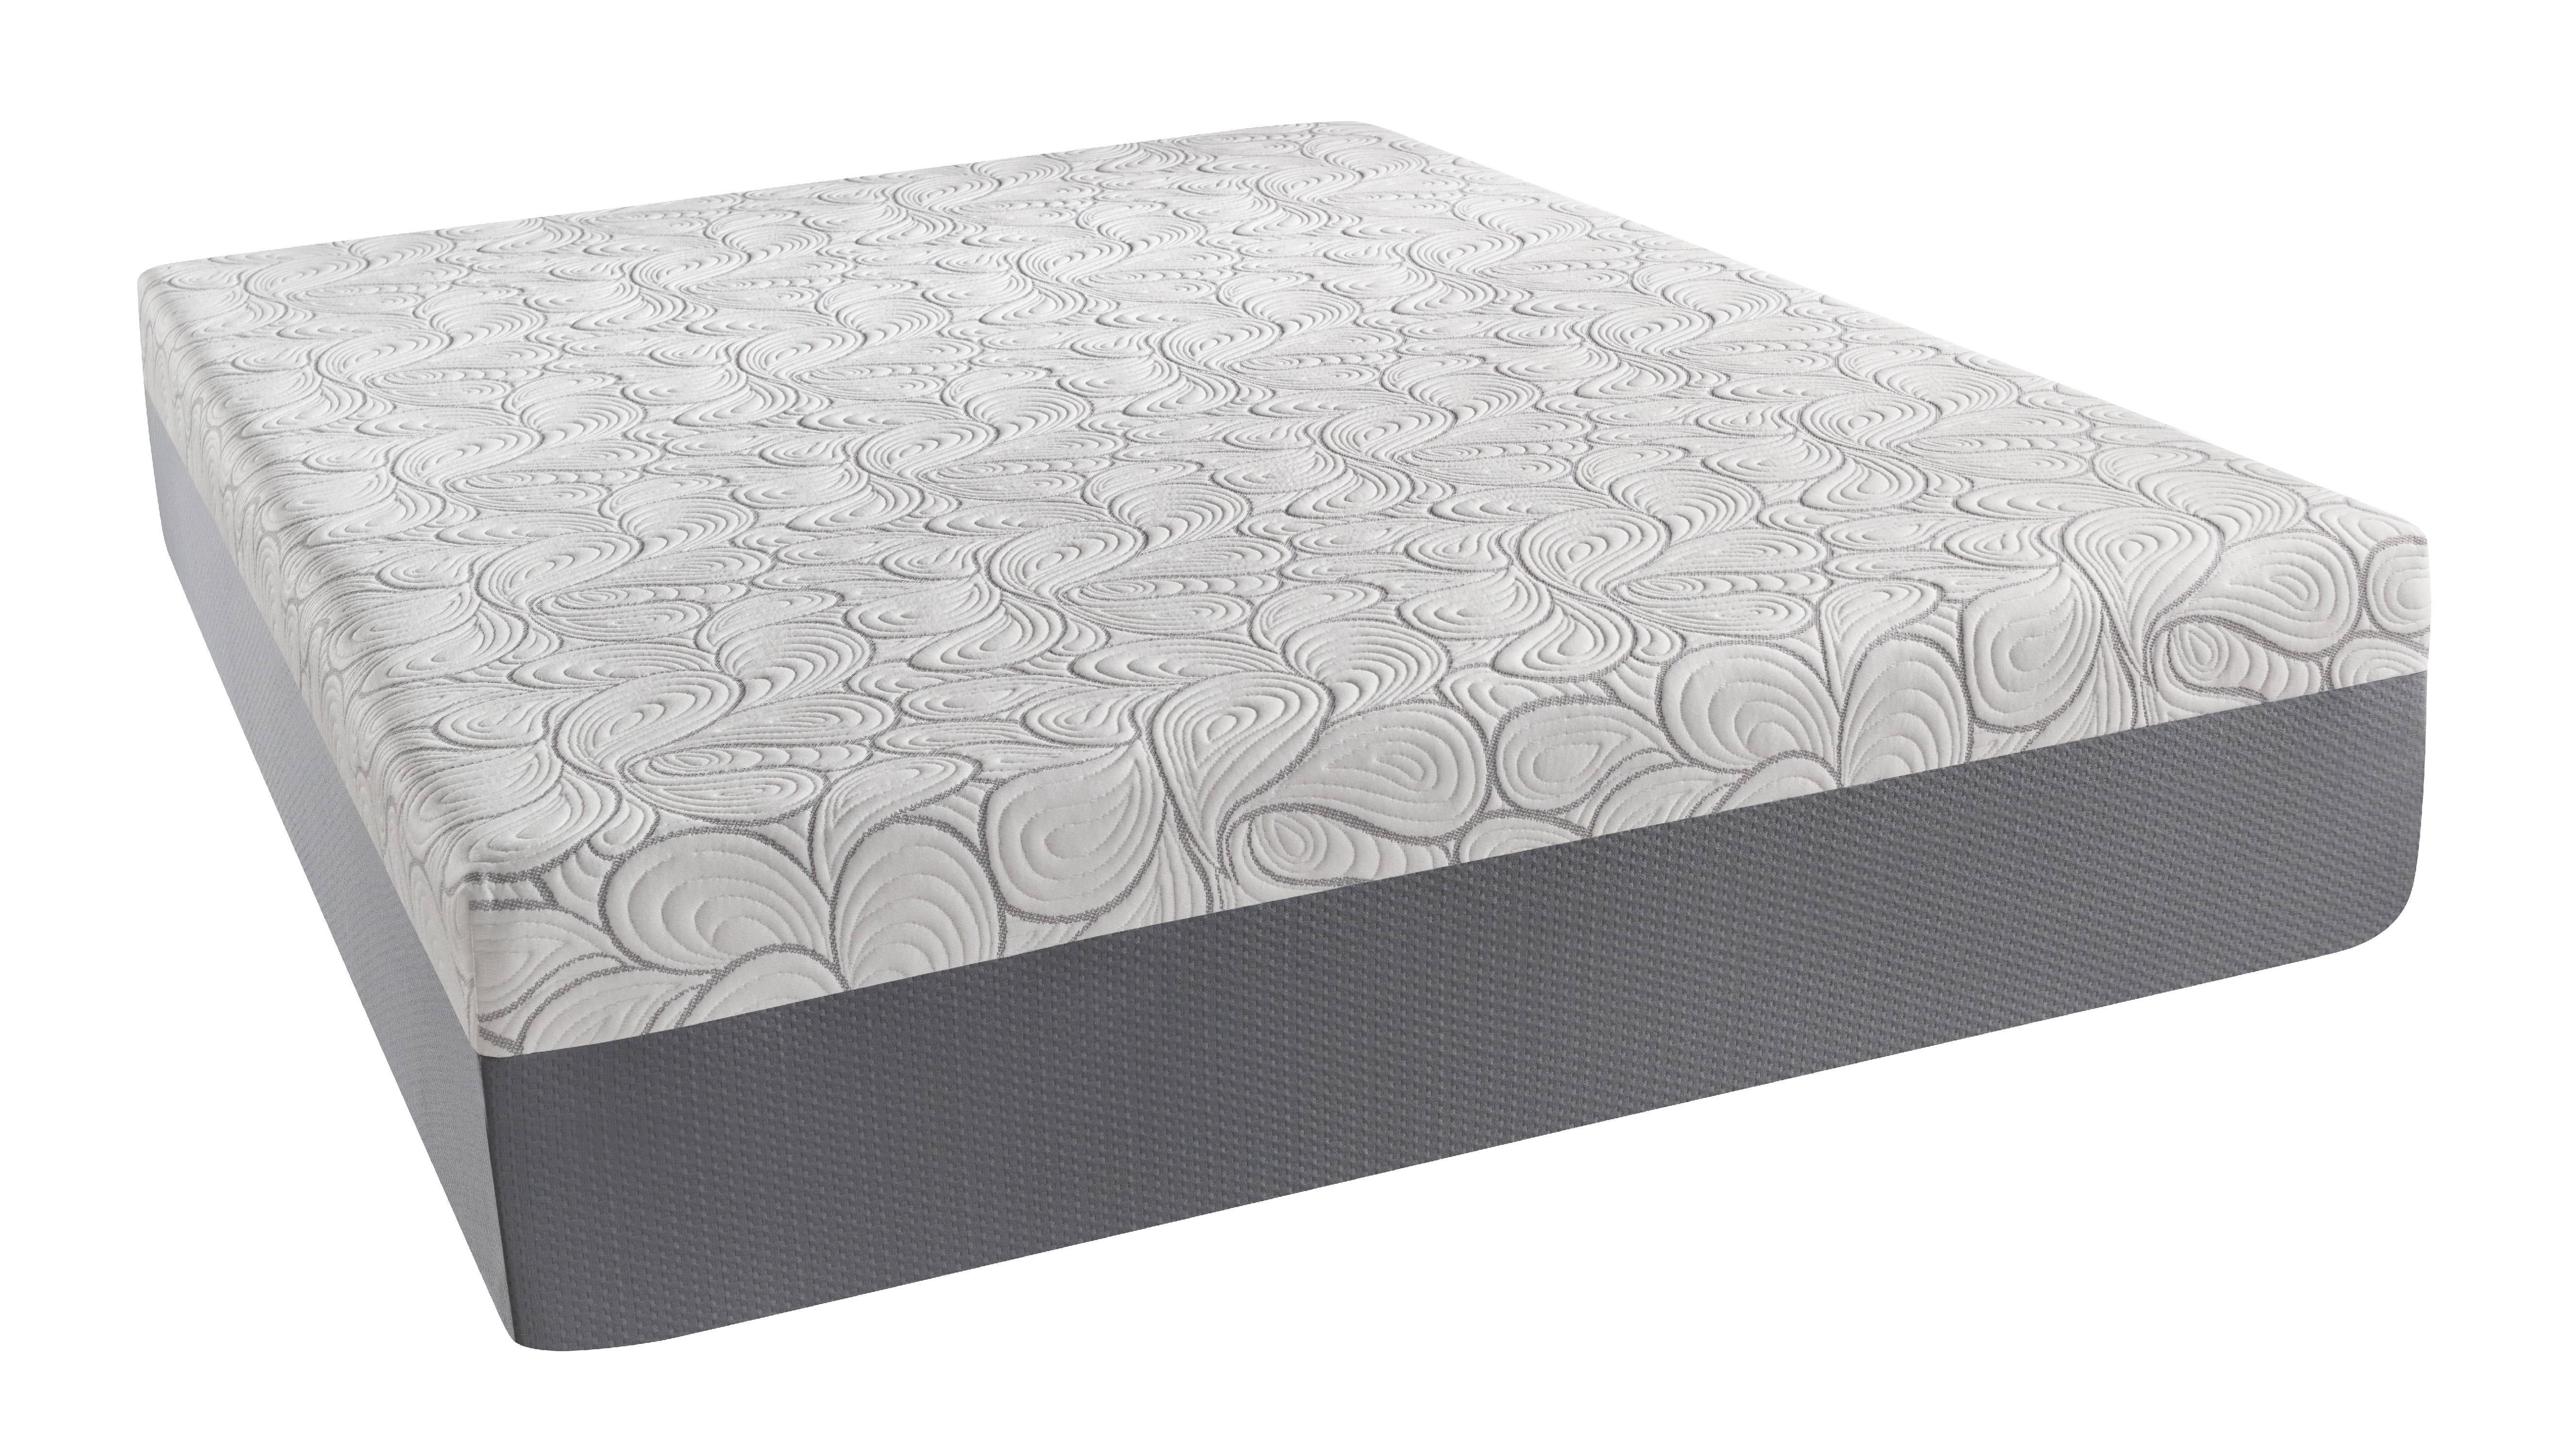 Memory foam and spring magic mattress Cashmere fabric All sizes 9 inches 